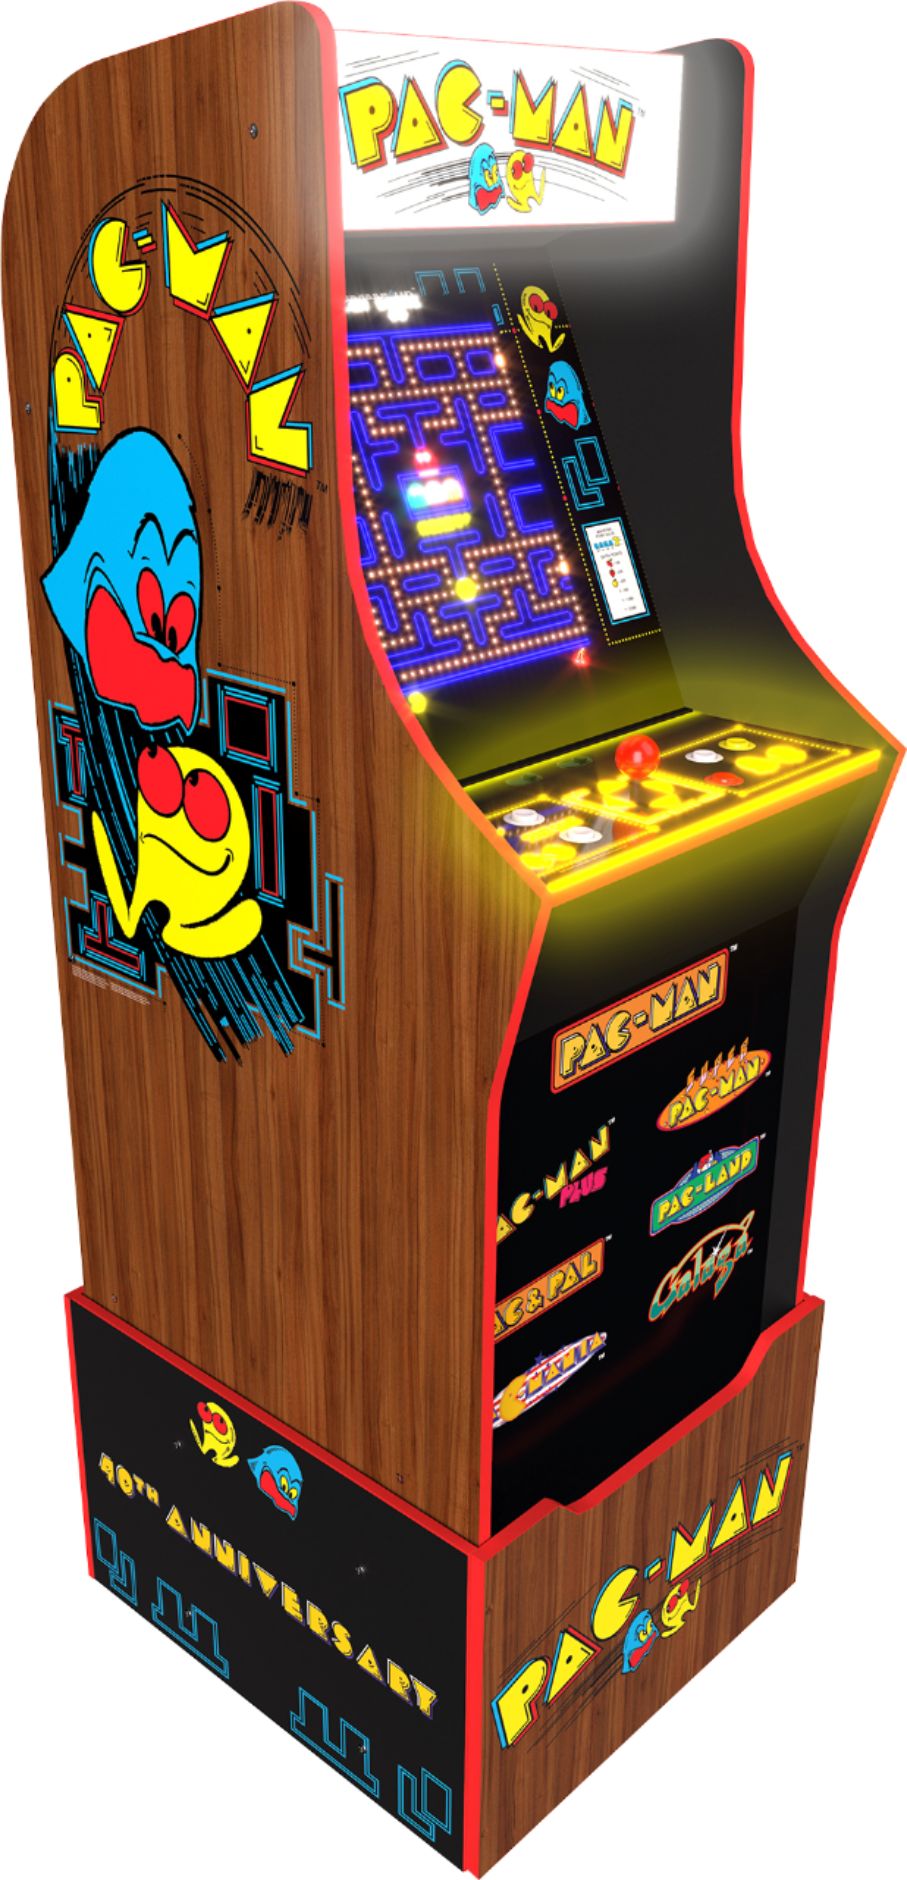 Top 40 Arcade Games From the Past 